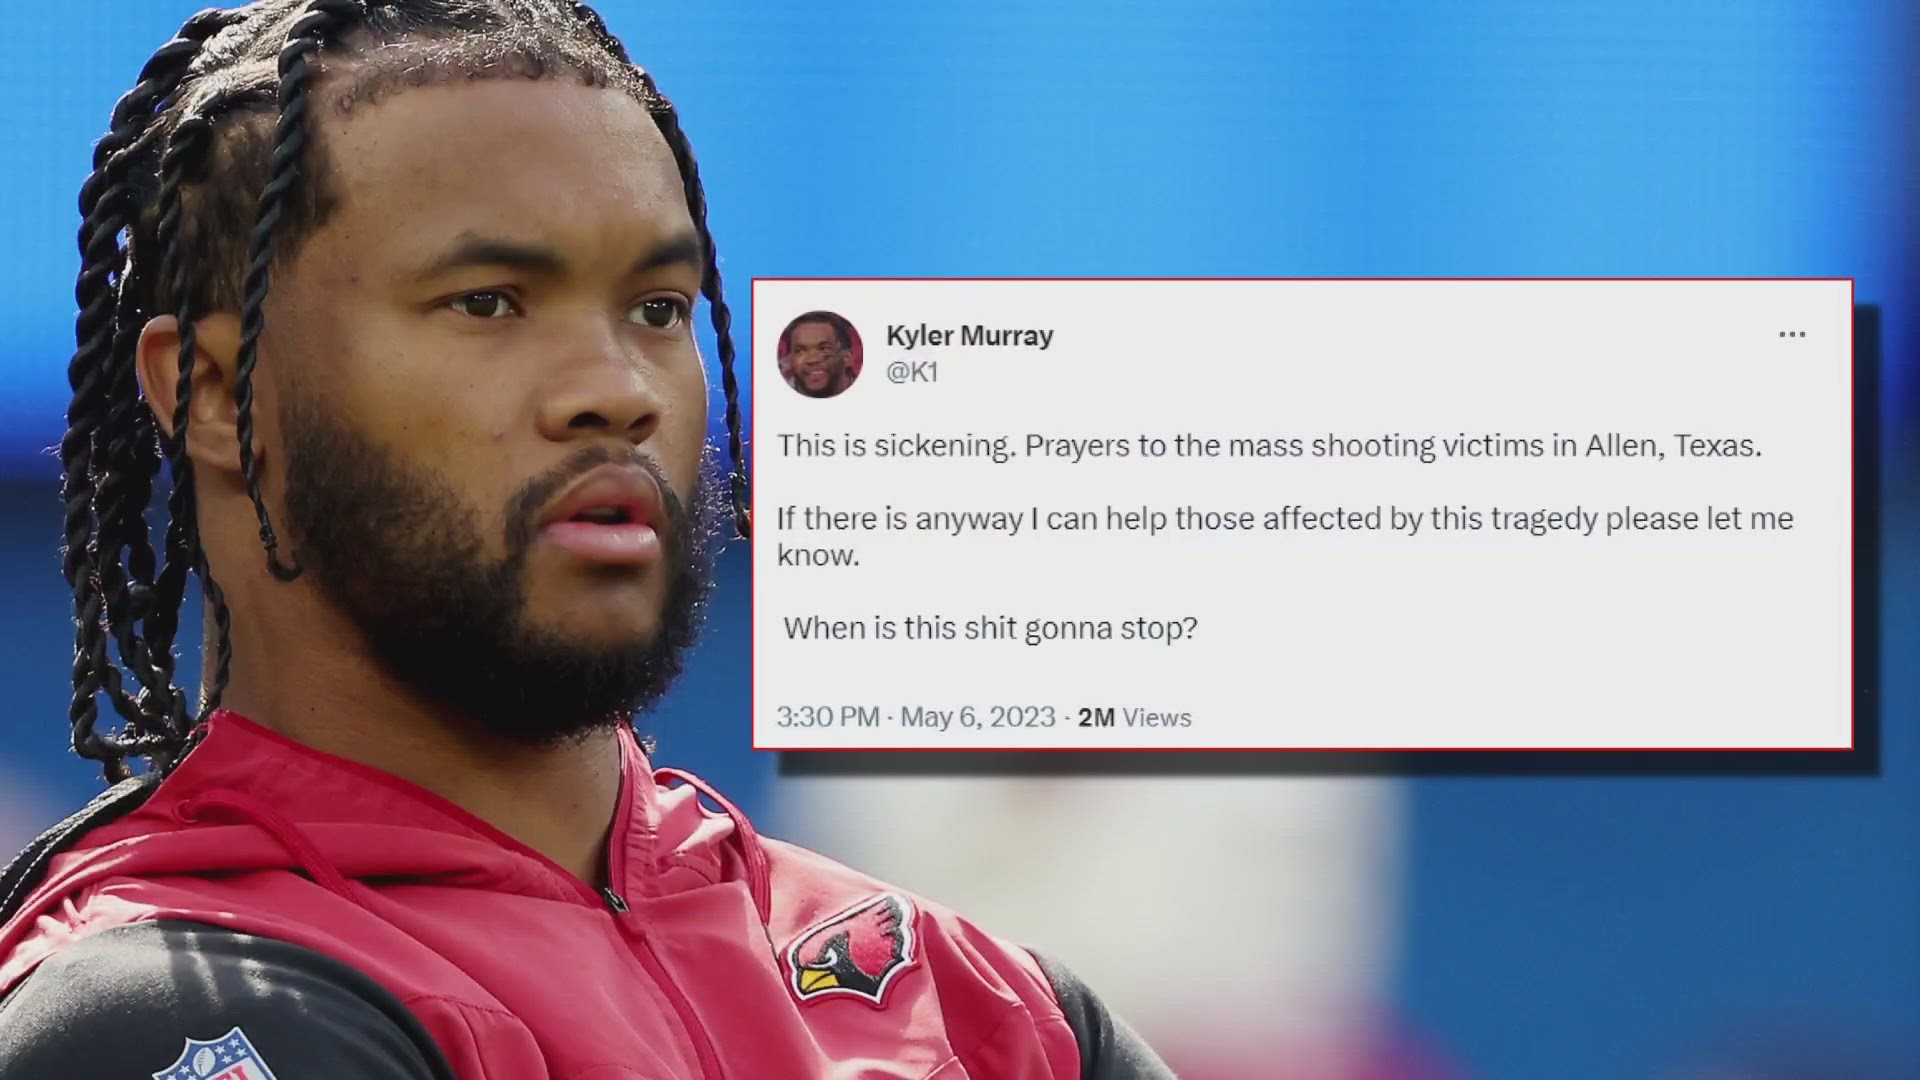 Kyler Murray, a native of Allen, Texas, donated financial resources to victims of the mass shooting in Texas.